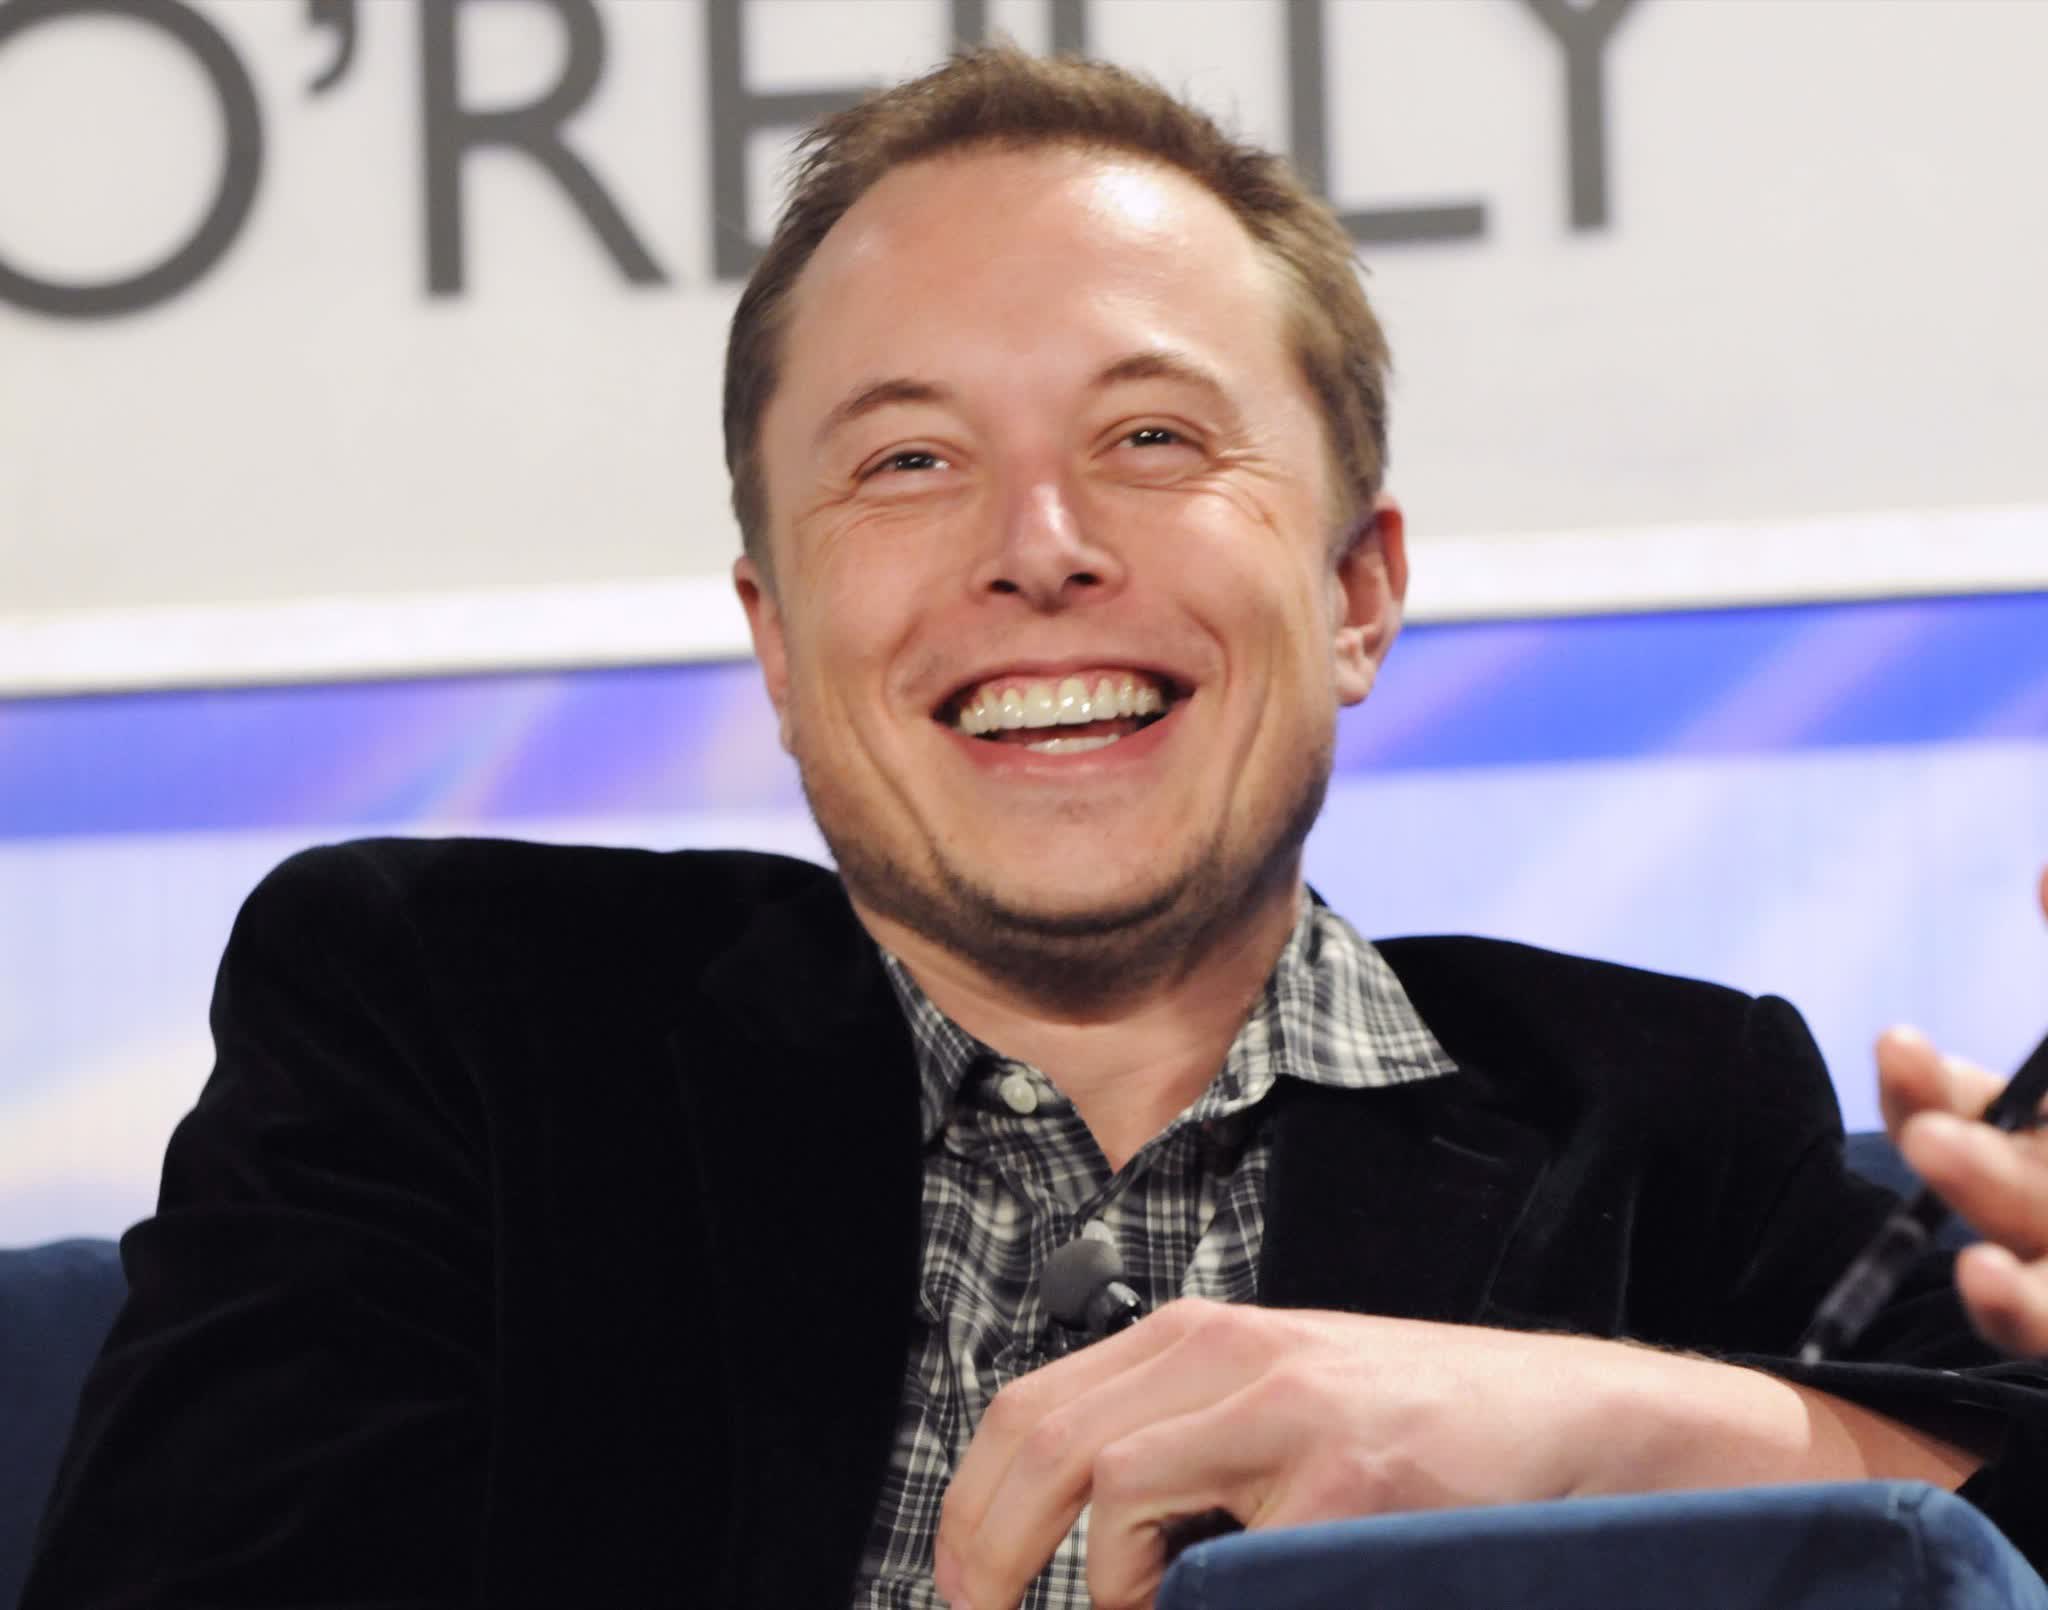 Elon Musk's poll asks users if he should step down as Twitter CEO, 57.5% vote yes